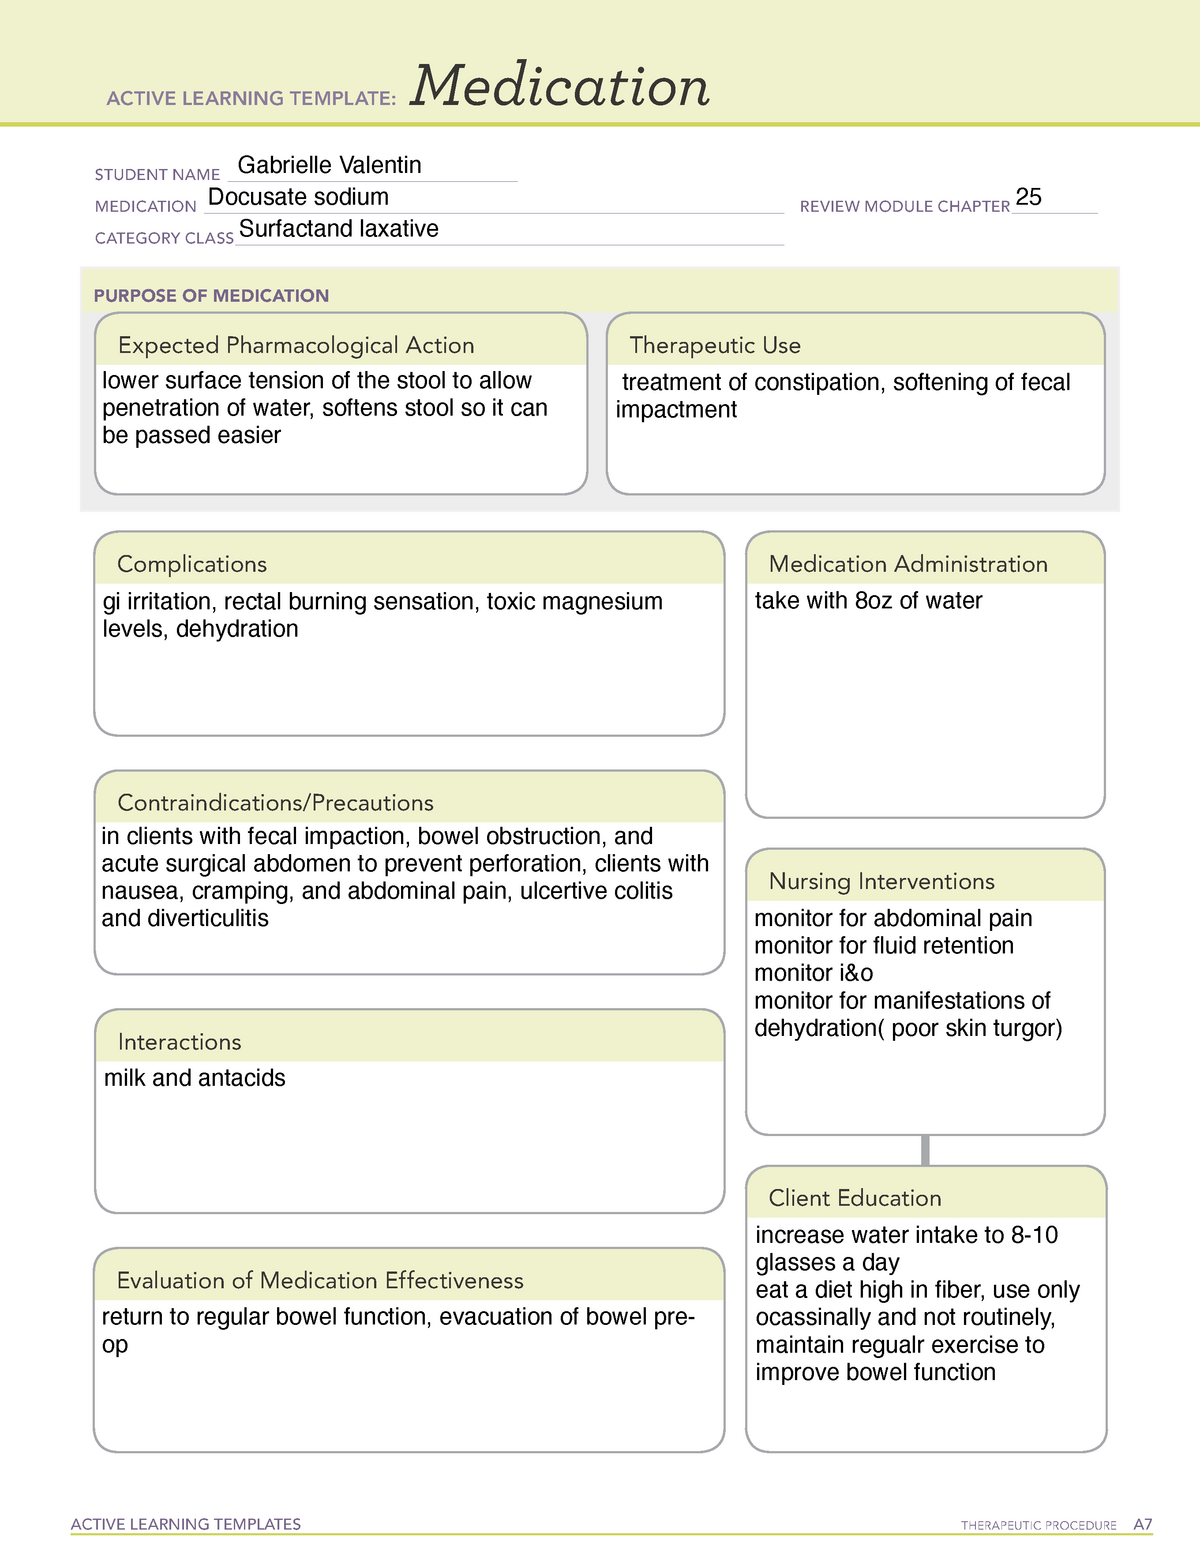 medication-sheet-colace-active-learning-templates-therapeutic